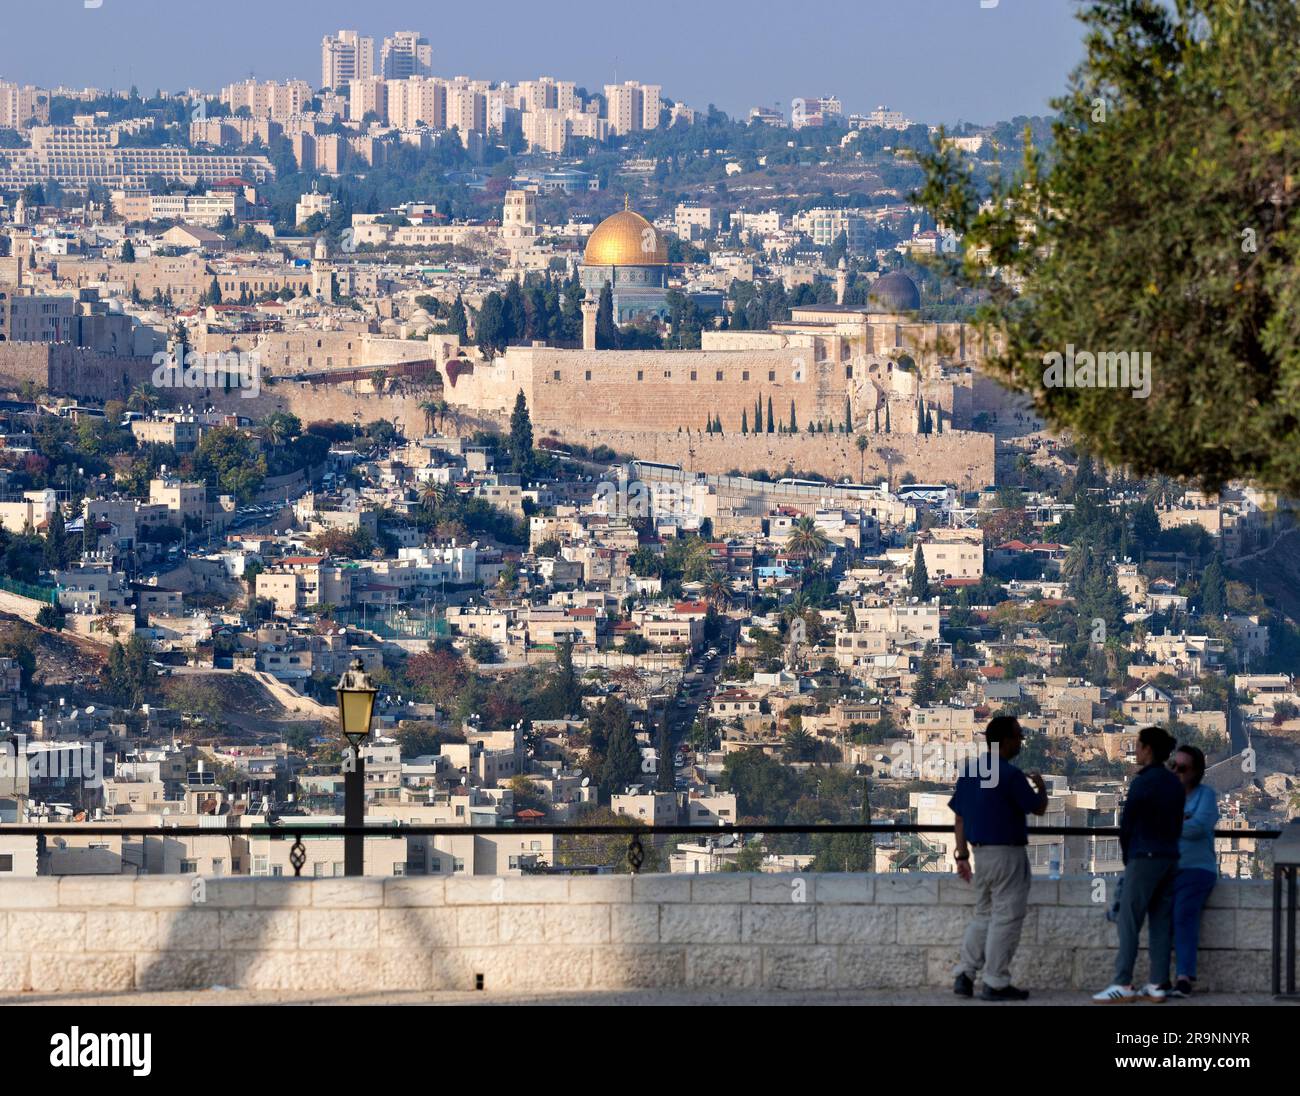 With over 5000 years of turbulent history behind it, Yerushalayim (Jerusalem) is one of the oldest cities in the world. Uniquely, it is sacred to thre Stock Photo